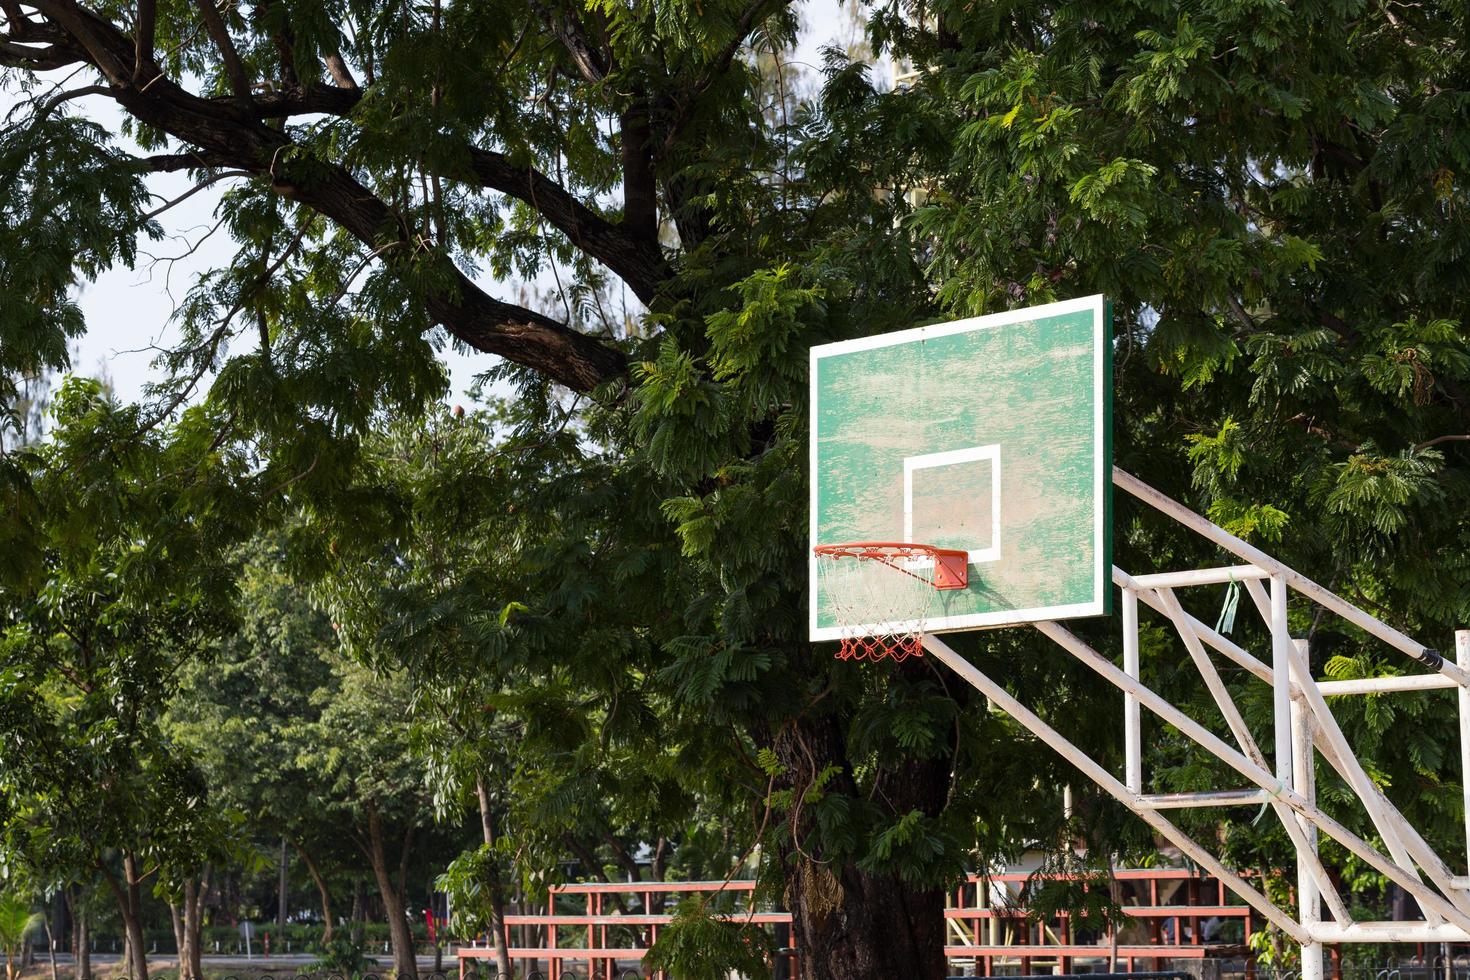 Basketball hoop in the park photo